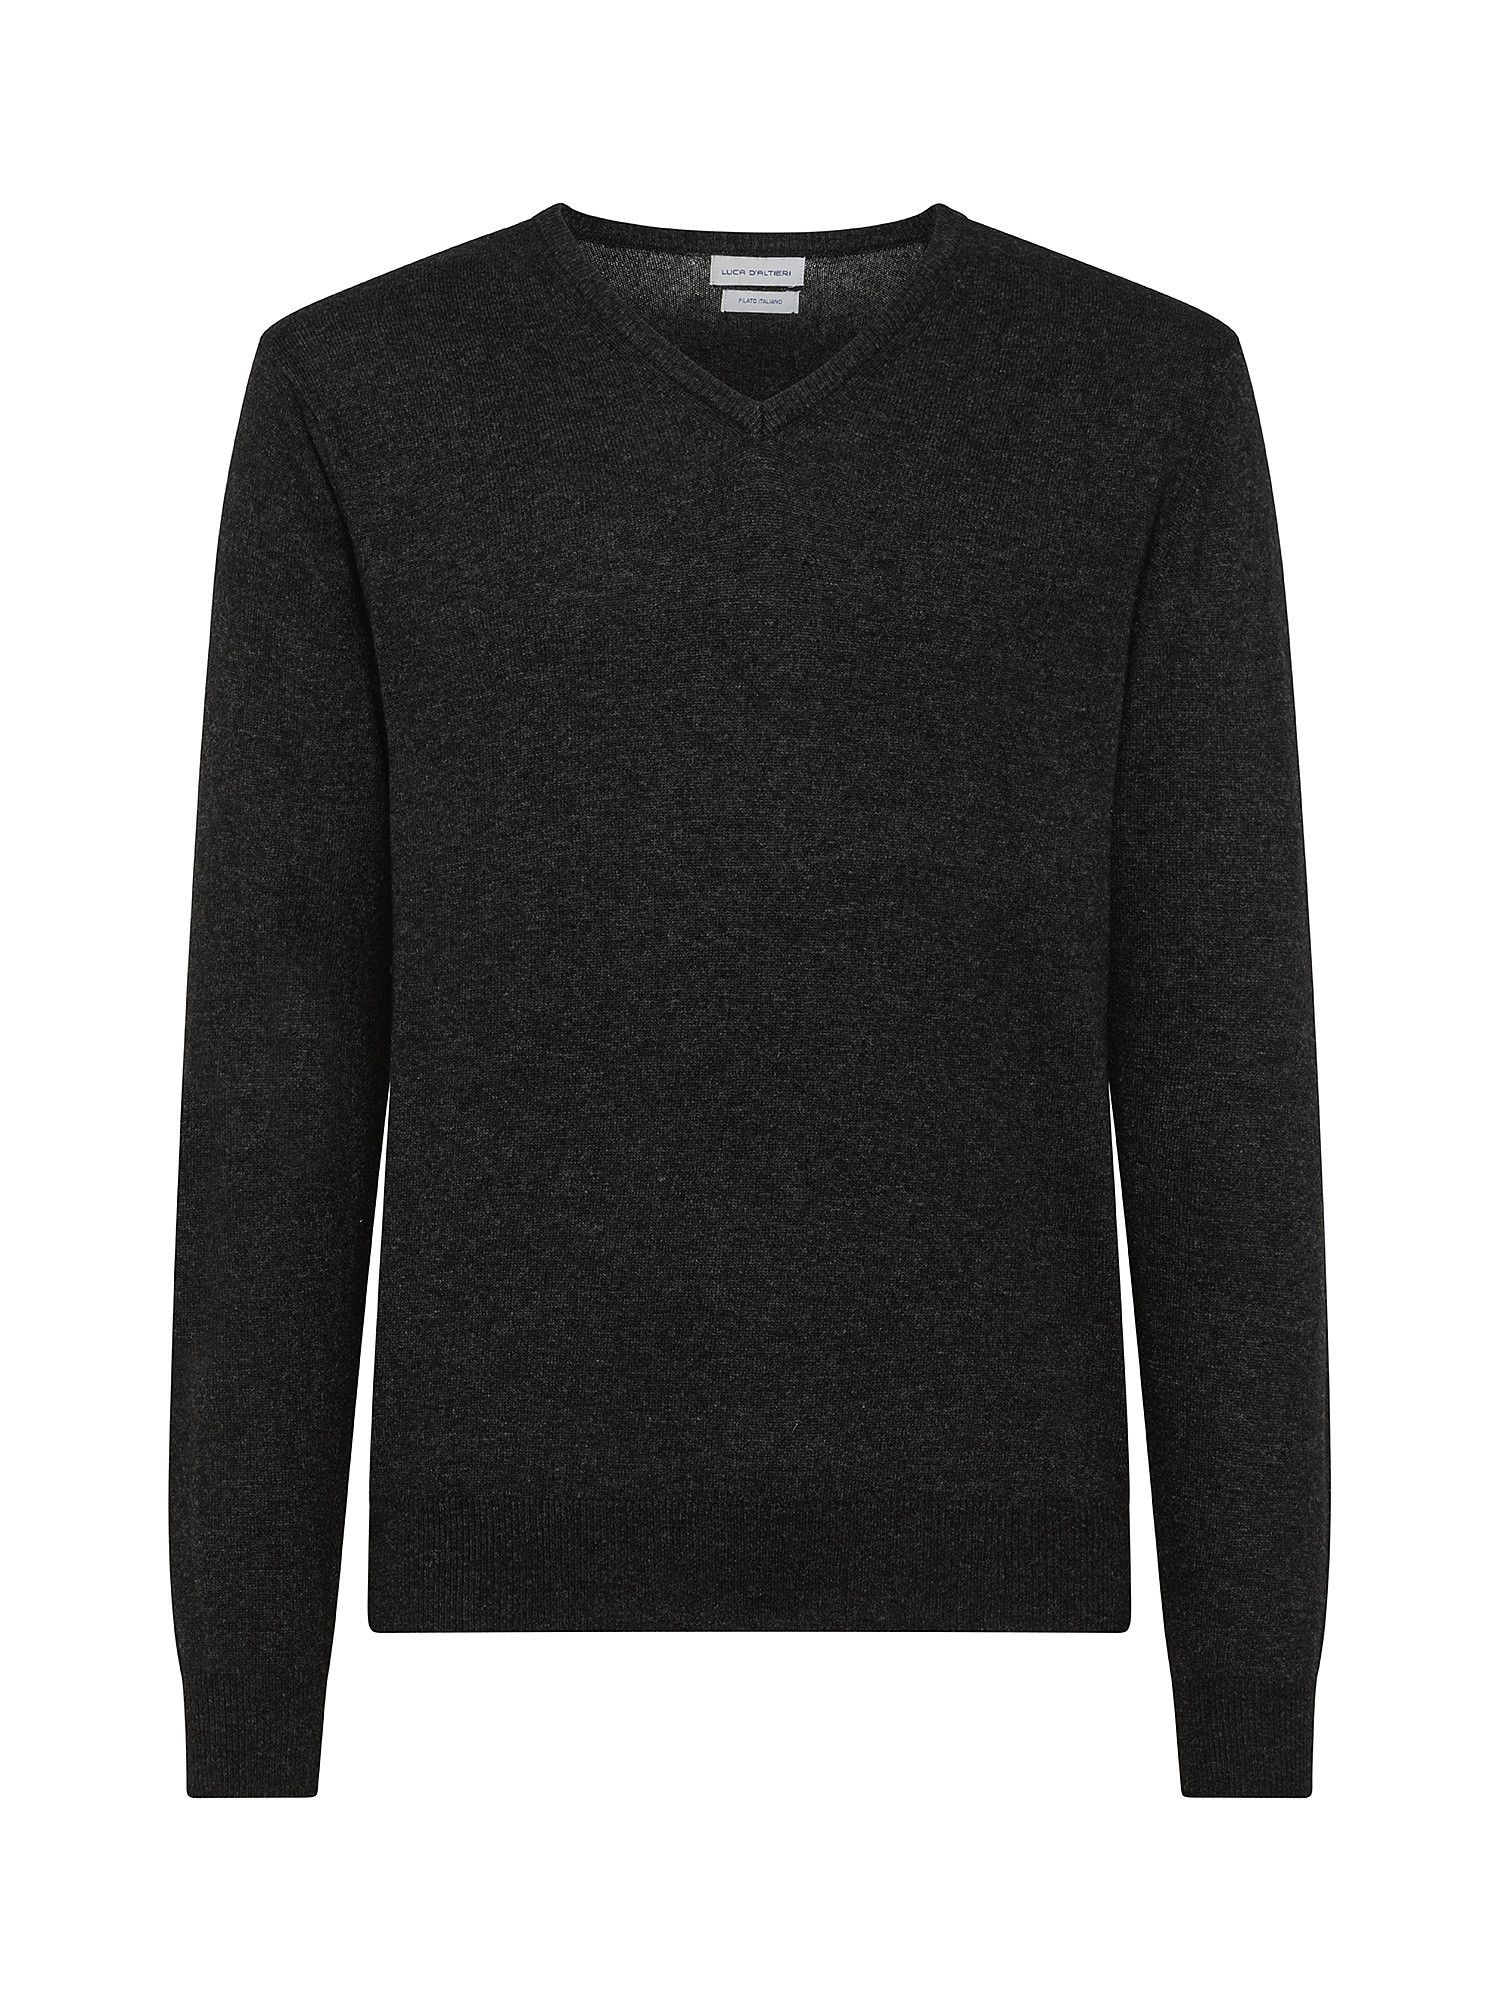 Cashmere Blend V-neck sweater with noble fibers, Anthracite, large image number 0